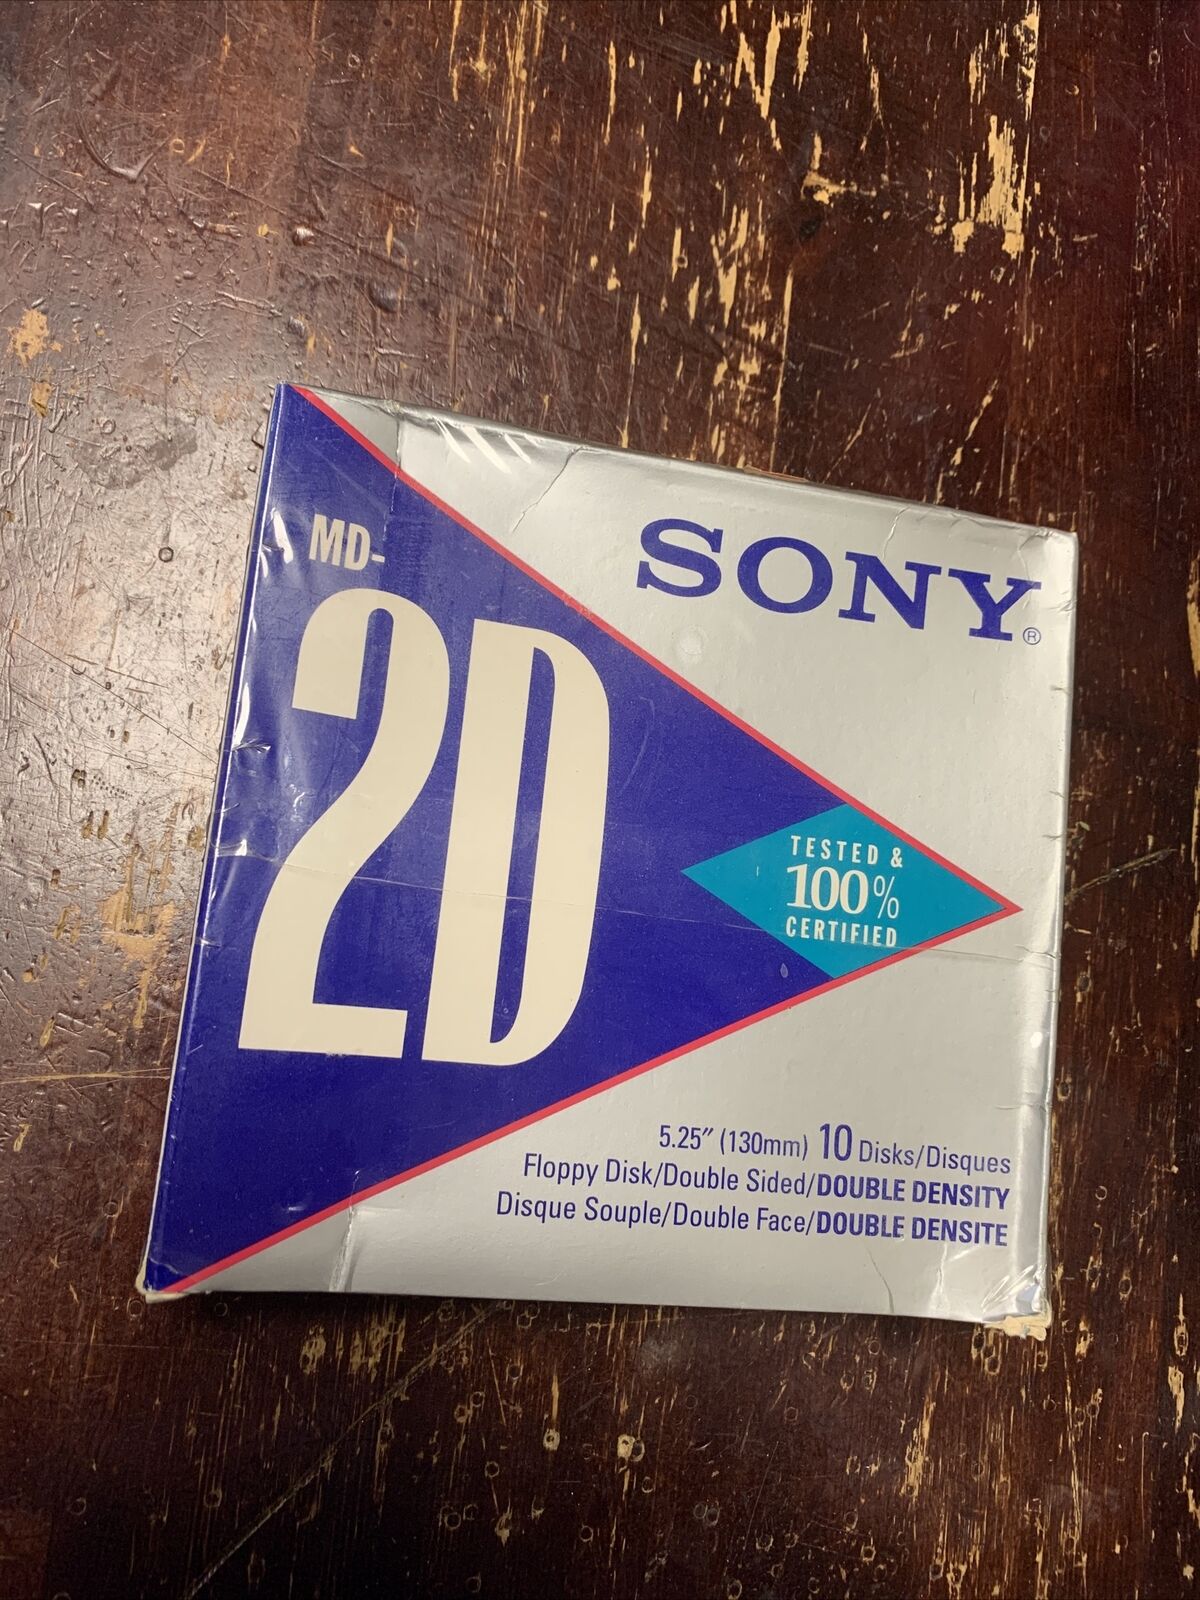 New Sony MD-2D 5.25” 10 Flappy Disks